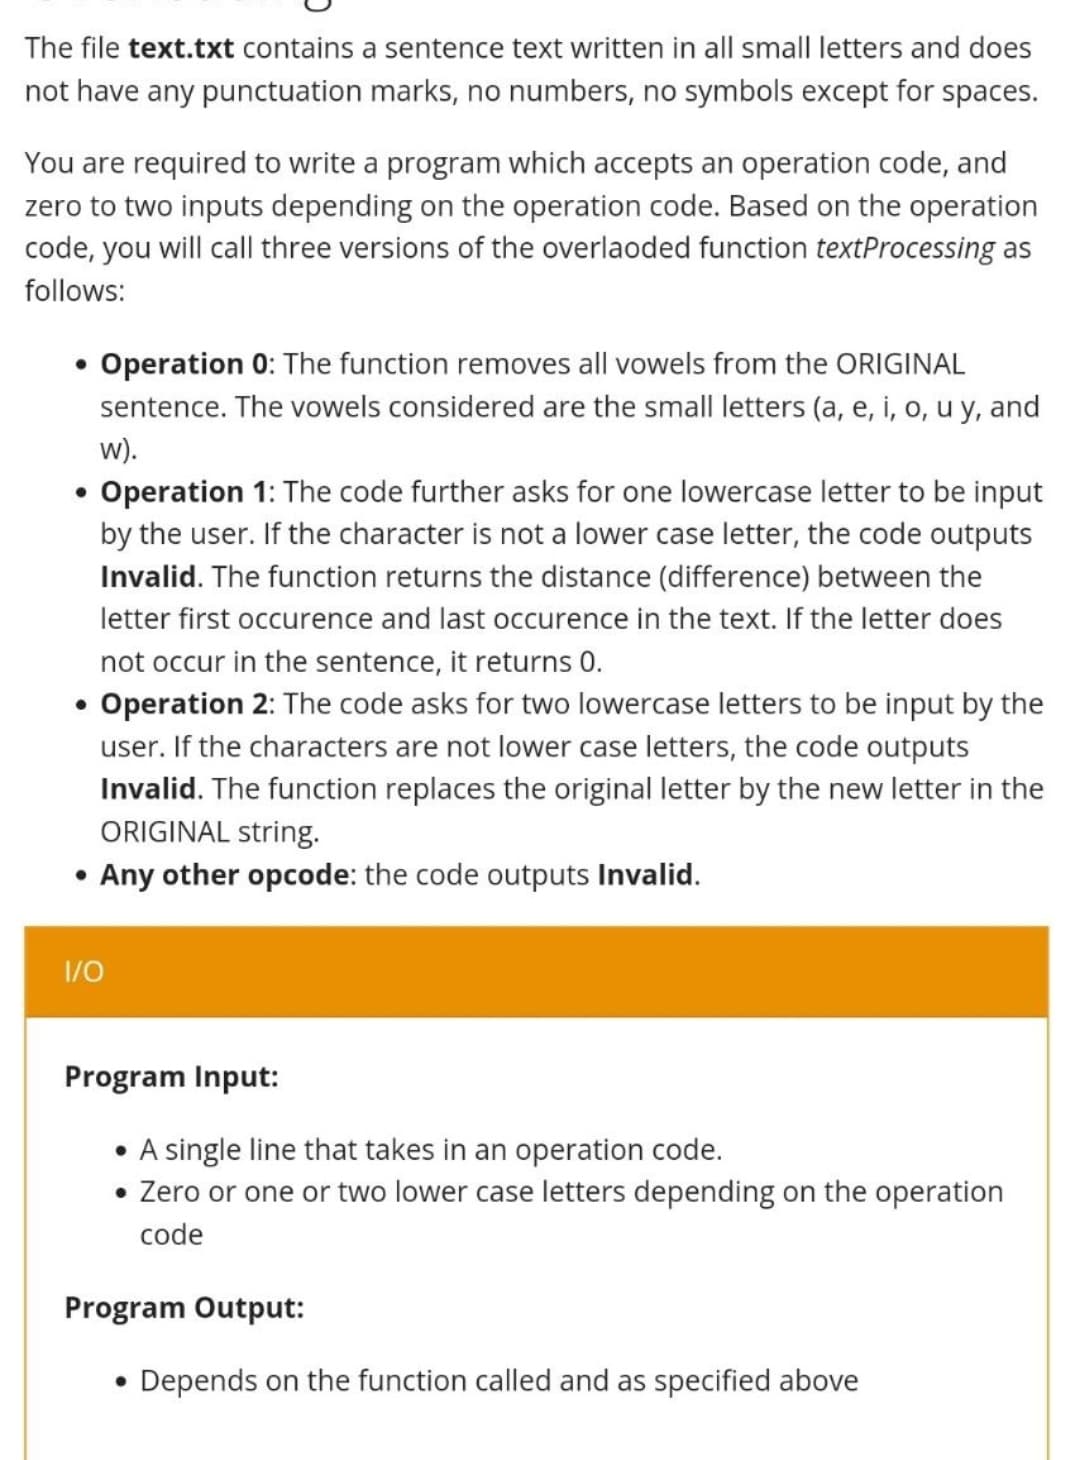 The file text.txt contains a sentence text written in all small letters and does
not have any punctuation marks, no numbers, no symbols except for spaces.
You are required to write a program which accepts an operation code, and
zero to two inputs depending on the operation code. Based on the operation
code, you will call three versions of the overlaoded function textProcessing as
follows:
●
Operation 0: The function removes all vowels from the ORIGINAL
sentence. The vowels considered are the small letters (a, e, i, o, u y, and
w).
• Operation 1: The code further asks for one lowercase letter to be input
by the user. If the character is not a lower case letter, the code outputs
Invalid.The function returns the distance (difference) between the
letter first occurence and last occurence in the text. If the letter does
not occur in the sentence, it returns 0.
• Operation 2: The code asks for two lowercase letters to be input by the
user. If the characters are not lower case letters, the code outputs
Invalid.The function replaces the original letter by the new letter in the
ORIGINAL string.
• Any other opcode: the code outputs Invalid.
1/0
Program Input:
• A single line that takes in an operation code.
• Zero or one or two lower case letters depending on the operation
code
Program Output:
• Depends on the function called and as specified above